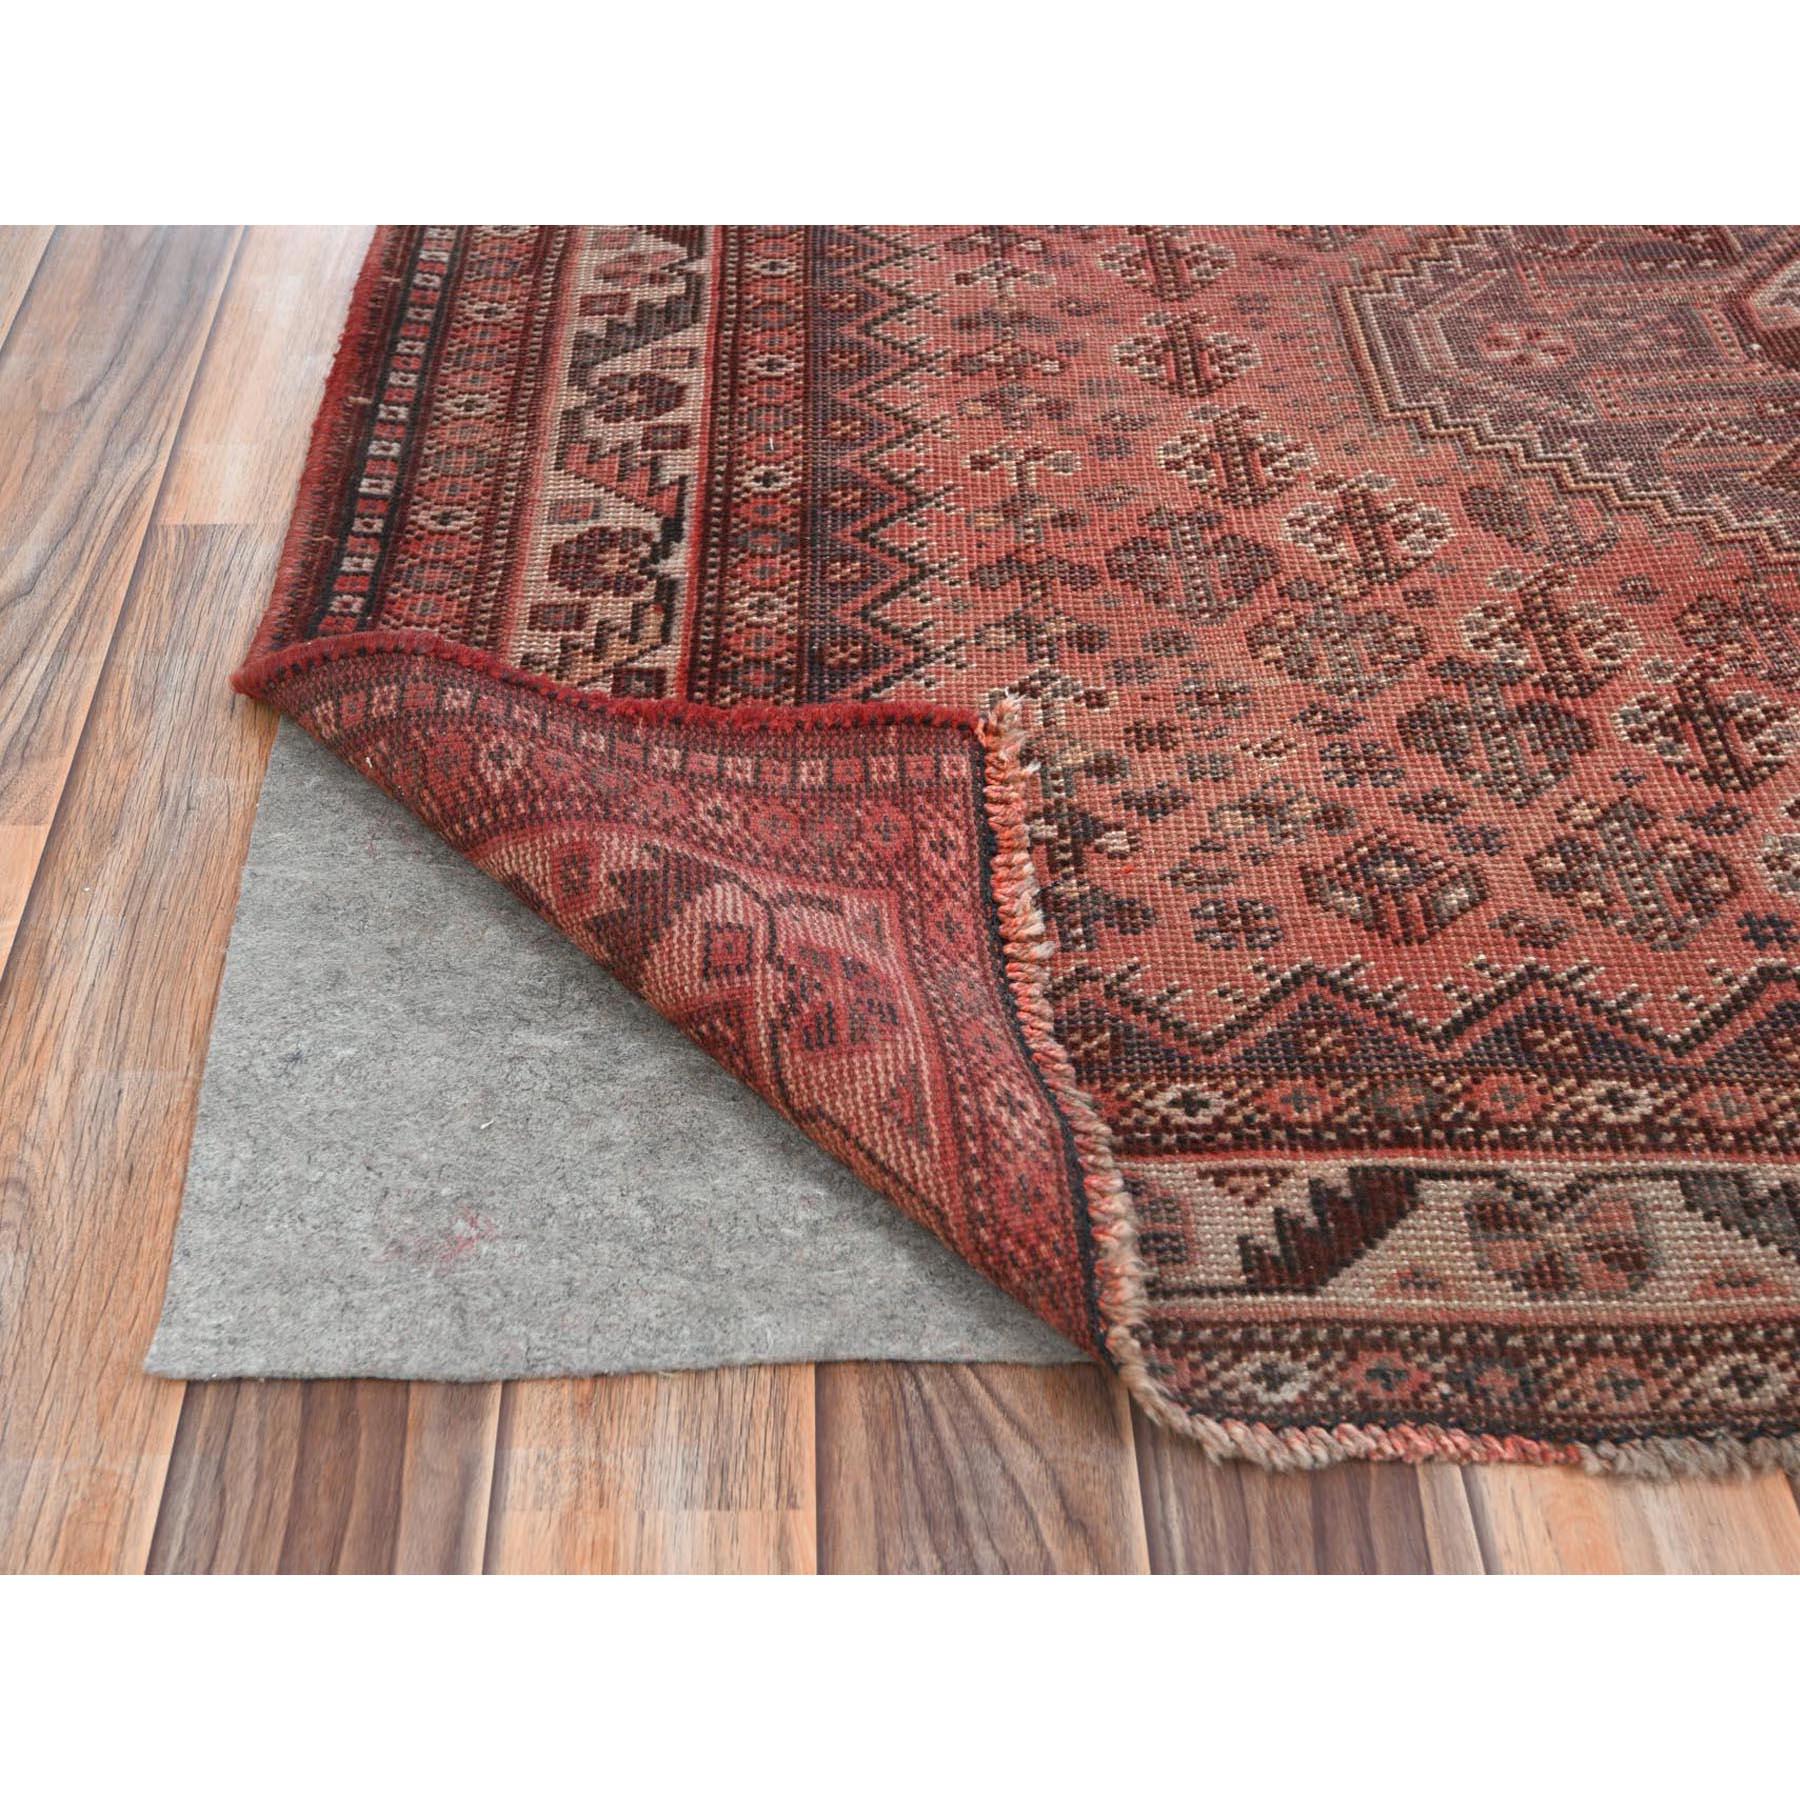 Medieval Tomato Red, Distressed Look Vintage Persian Shiraz, Hand Knotted Worn Wool Rug For Sale